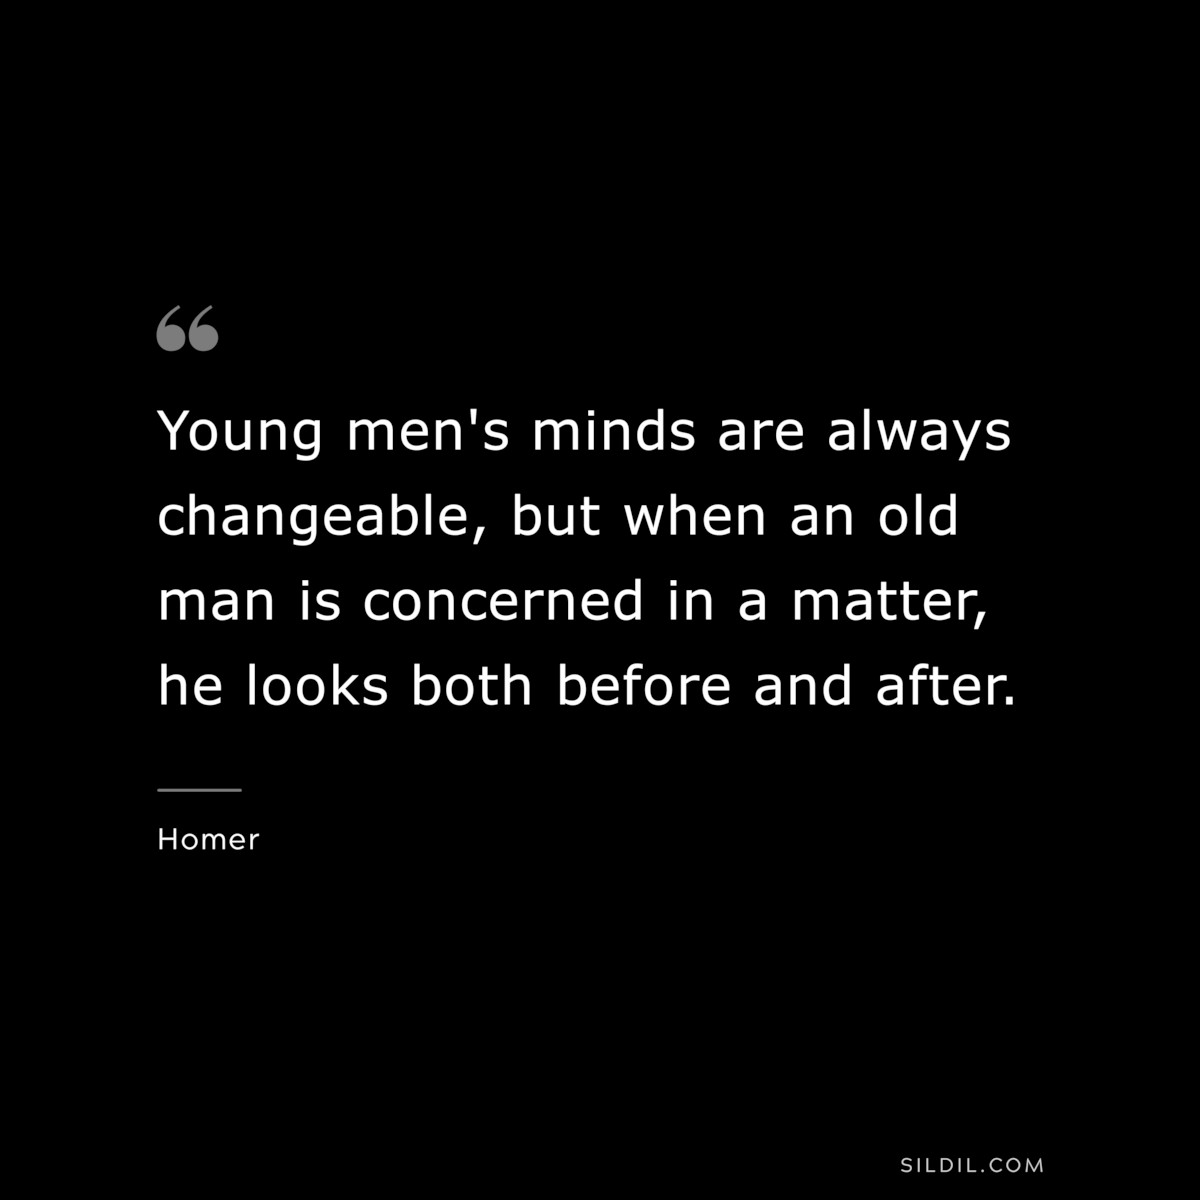 Young men's minds are always changeable, but when an old man is concerned in a matter, he looks both before and after. ― Homer